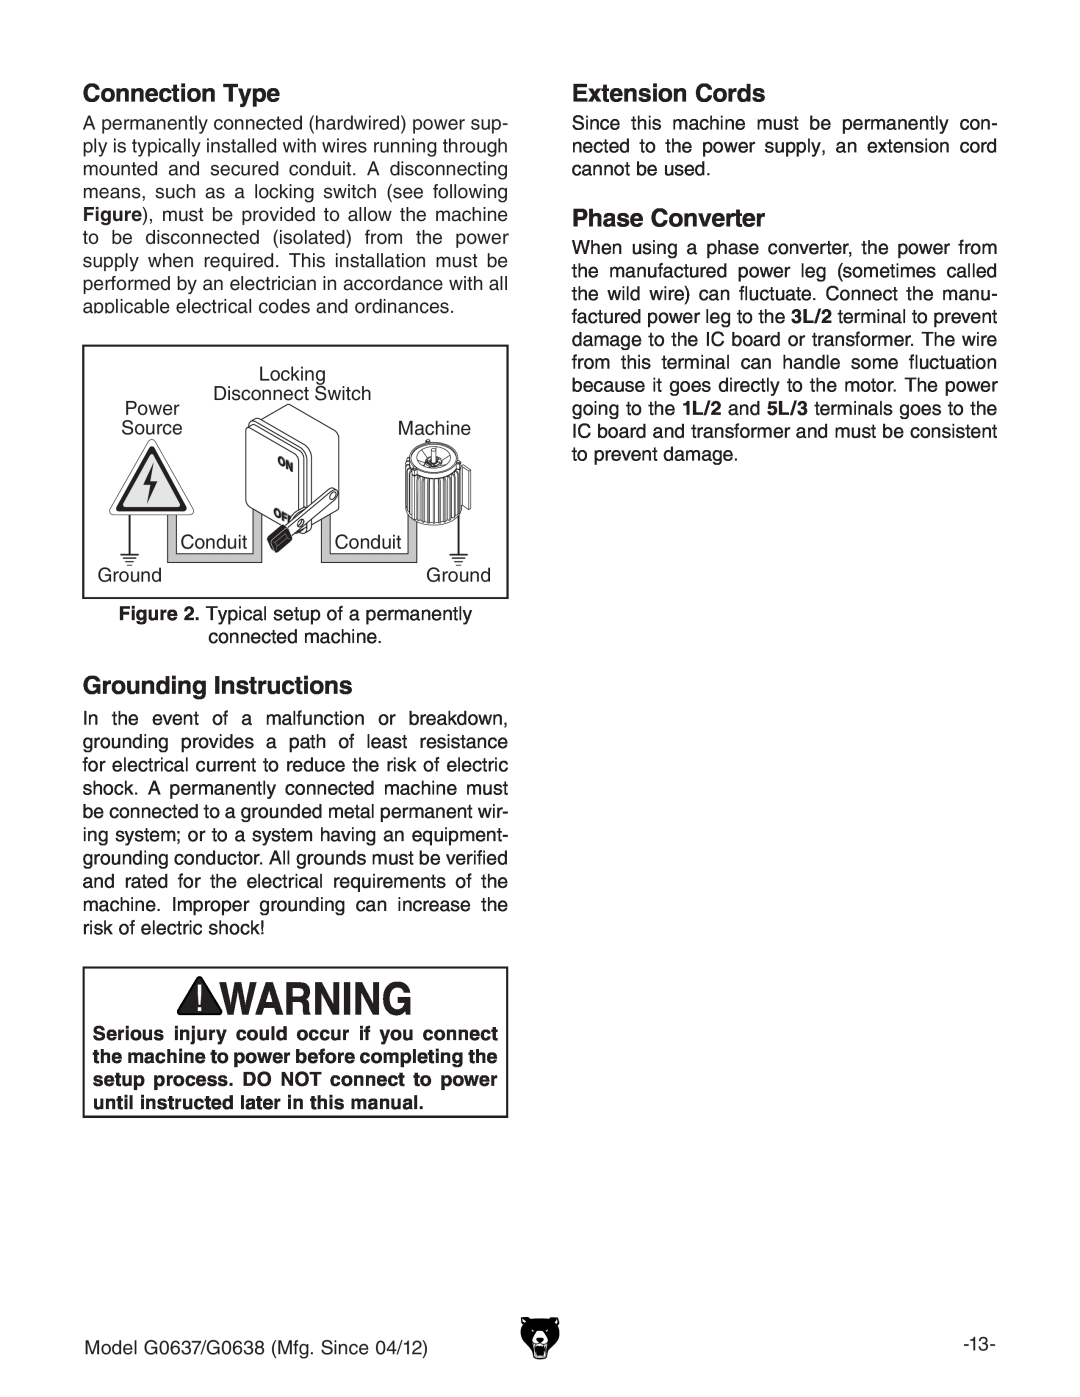 Grizzly G0637 owner manual Connection Type, Grounding Instructions, Extension Cords, Phase Converter 